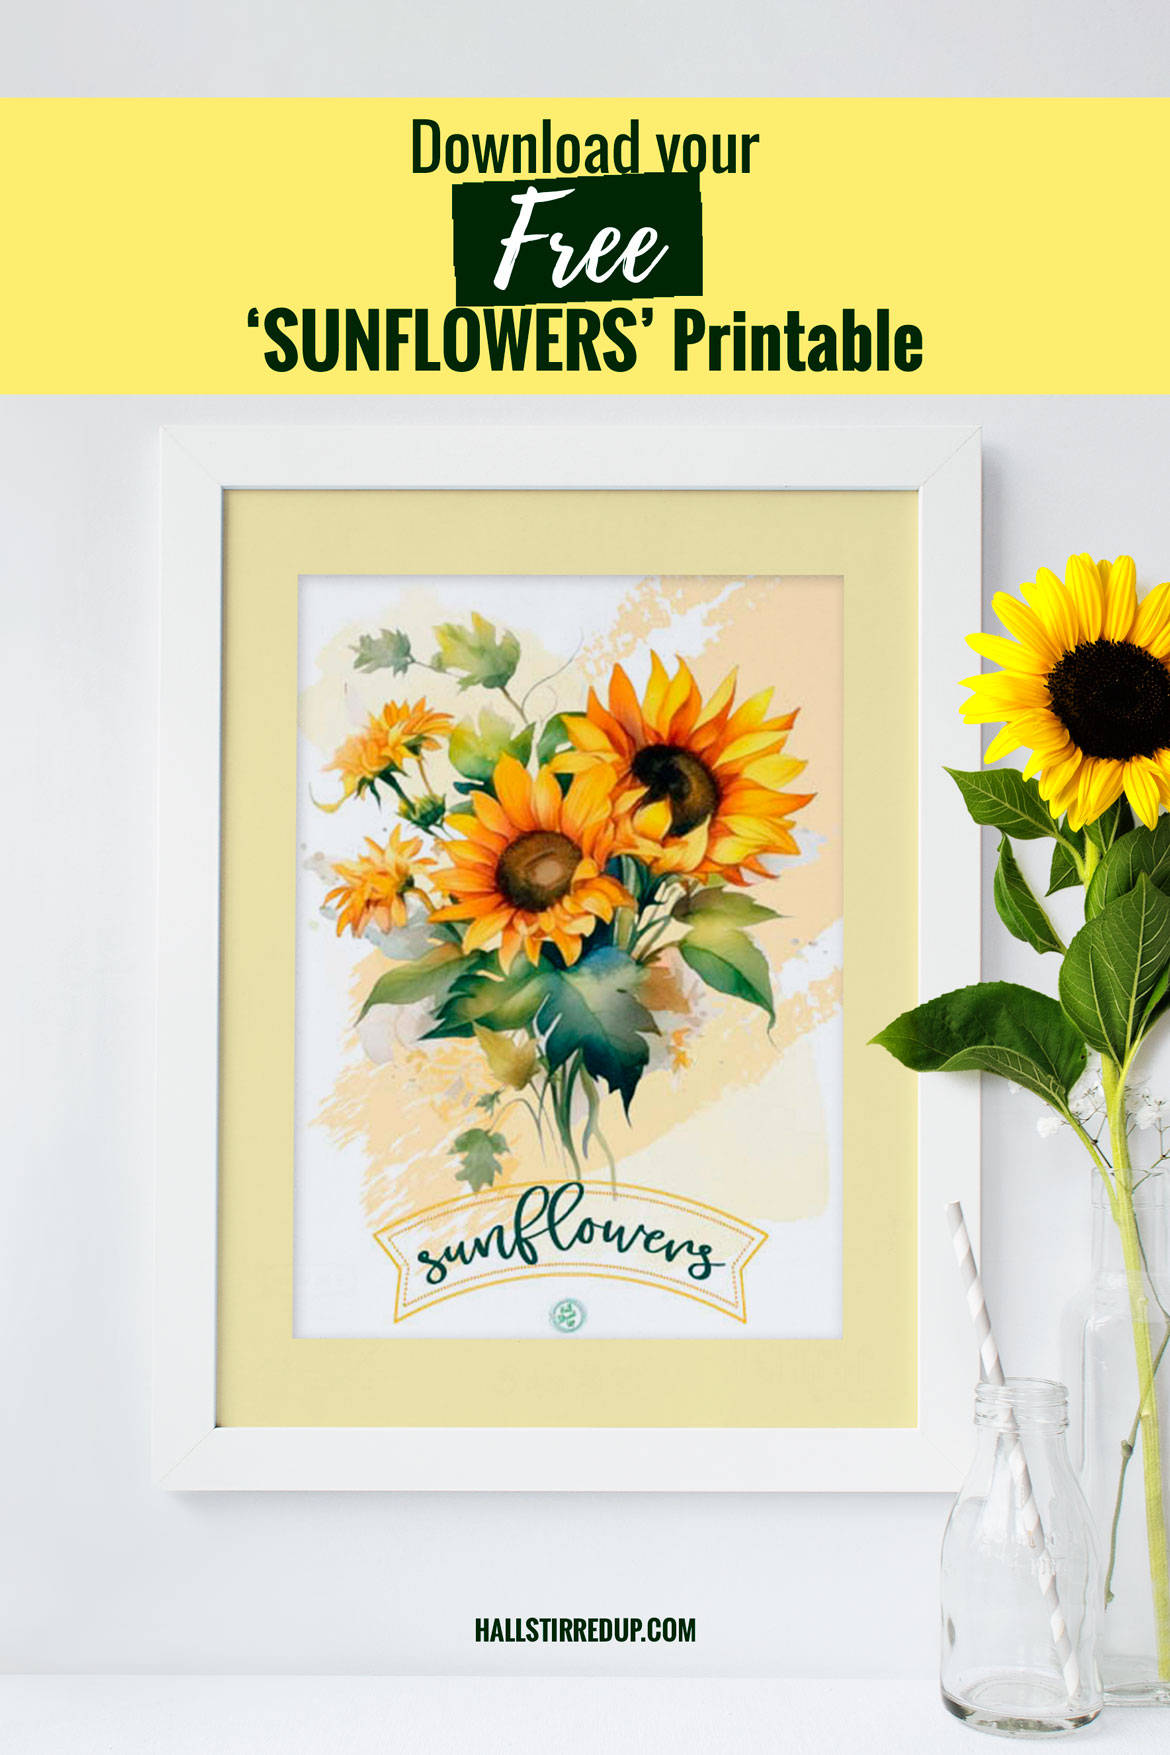 I love Sunflowers! Includes free printable